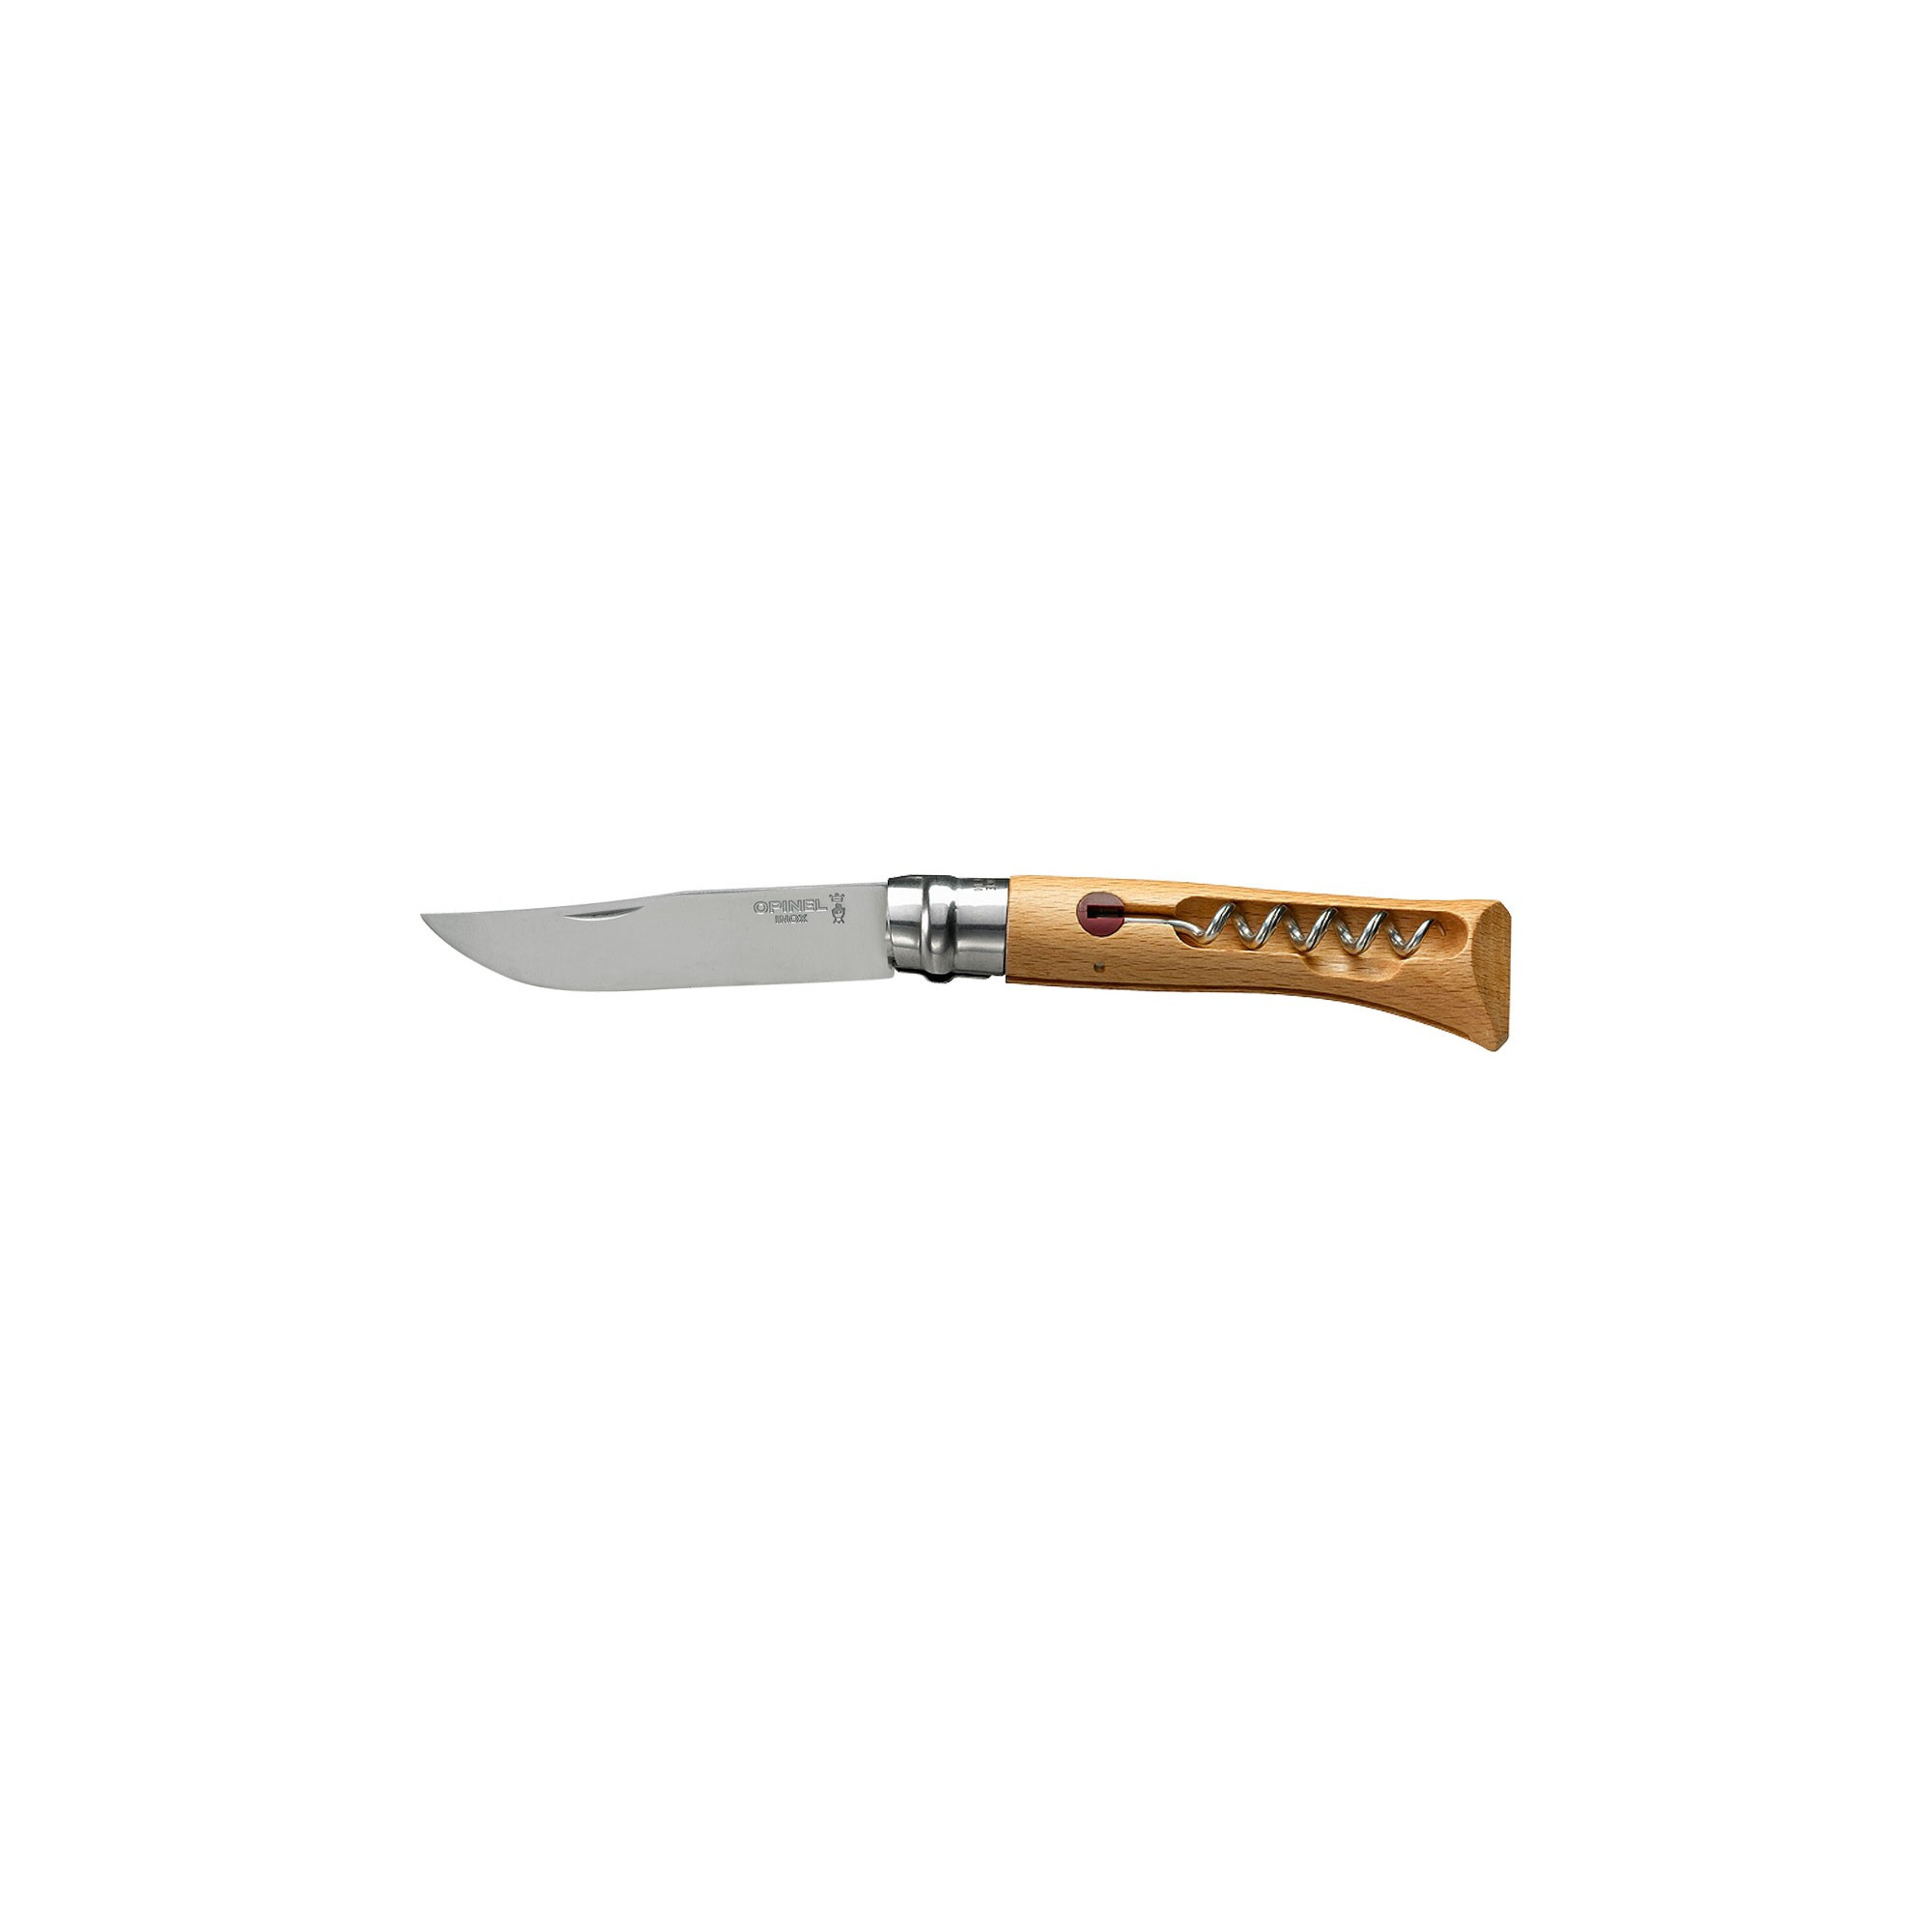 2-piece OPINEL knife with n°10 stainless steel blade and corkscrew